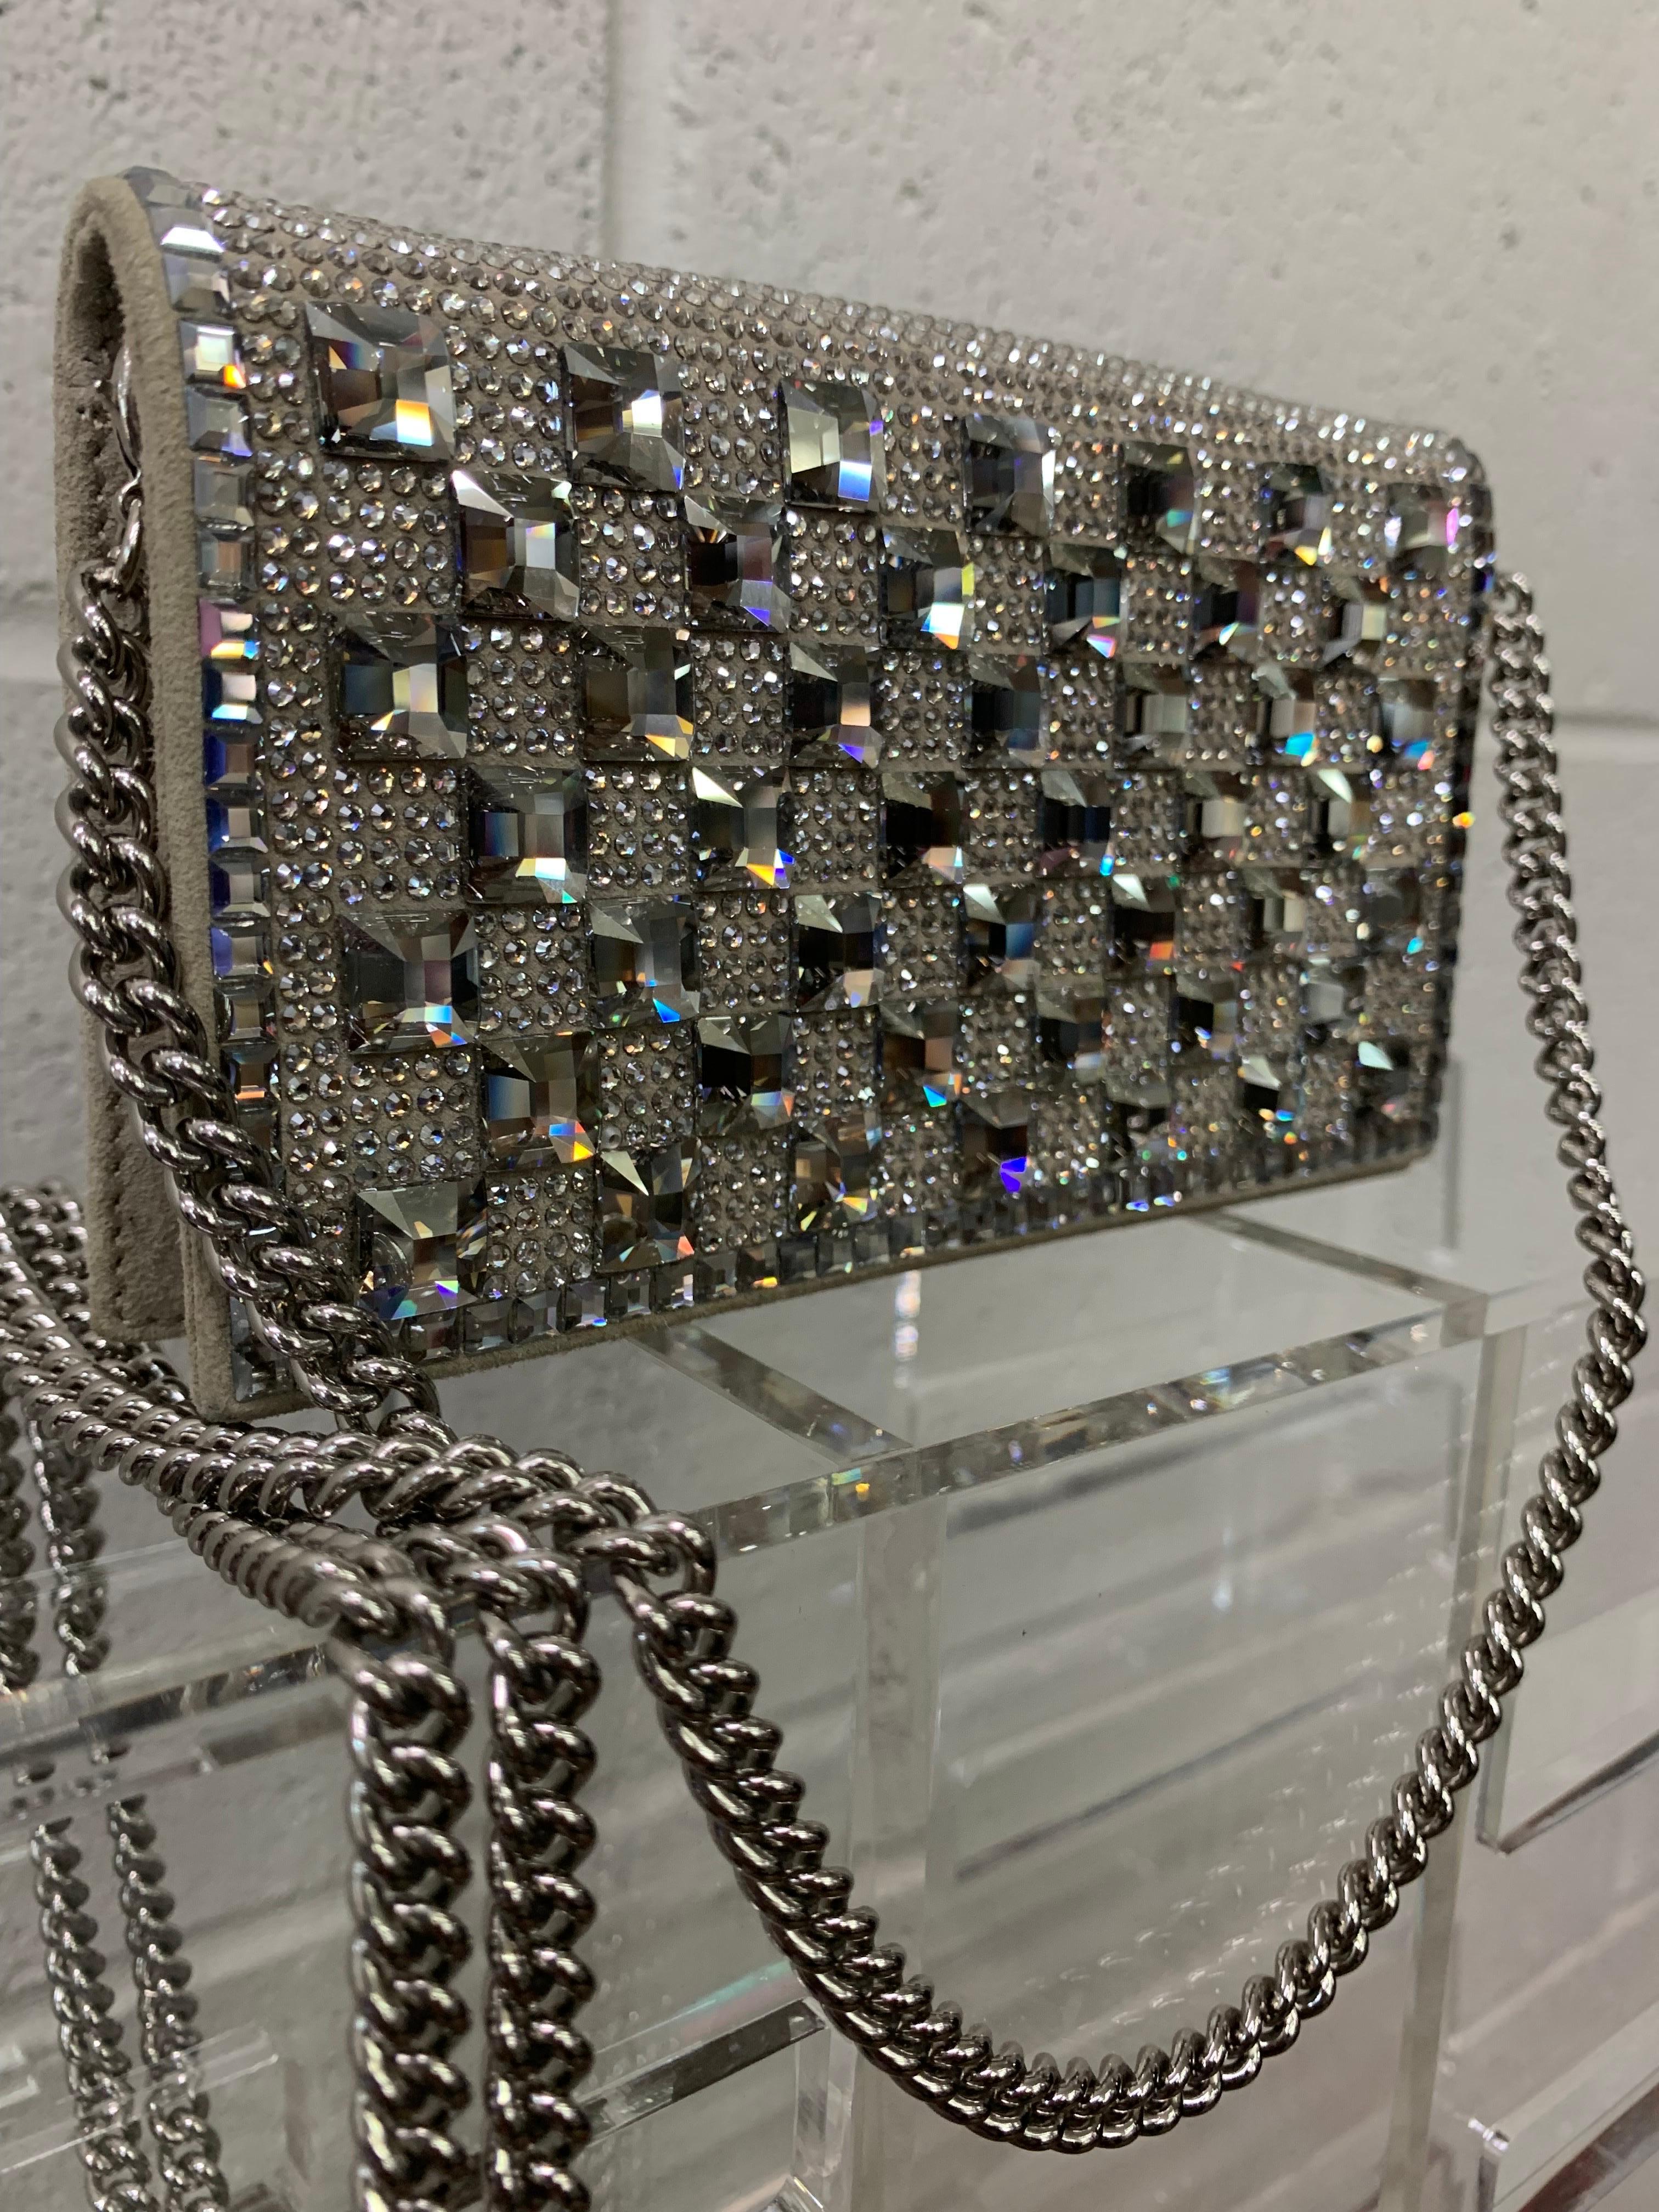 Ralph Lauren Spectacular Solid Crystal Disco Shoulder Bag w Chain Handle: Front flap closure on this stunner!  New, never worn. Original price marked $2500. Heavy silver chain handle can be worn as a crossbody bag or shoulder bag. Chain can be